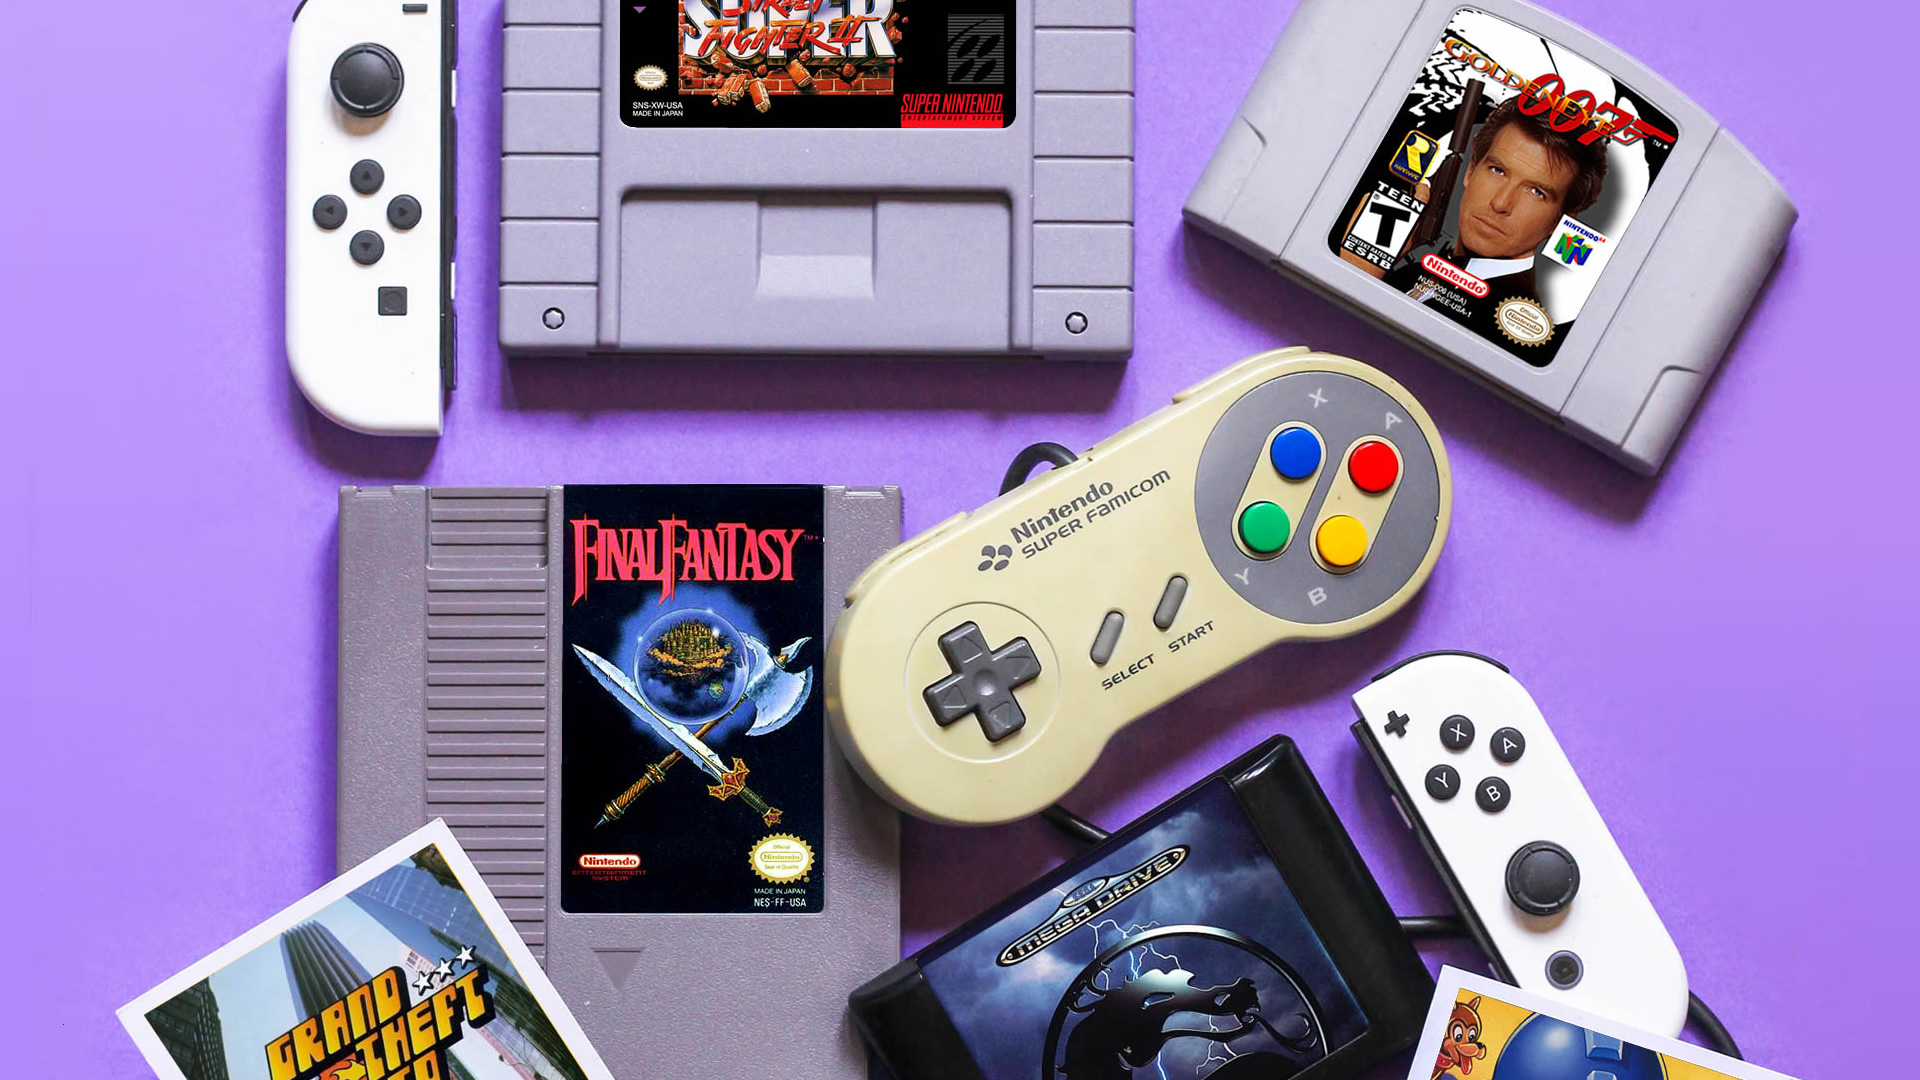 2022 Video Game & Gaming Anniversaries – A Complete List!